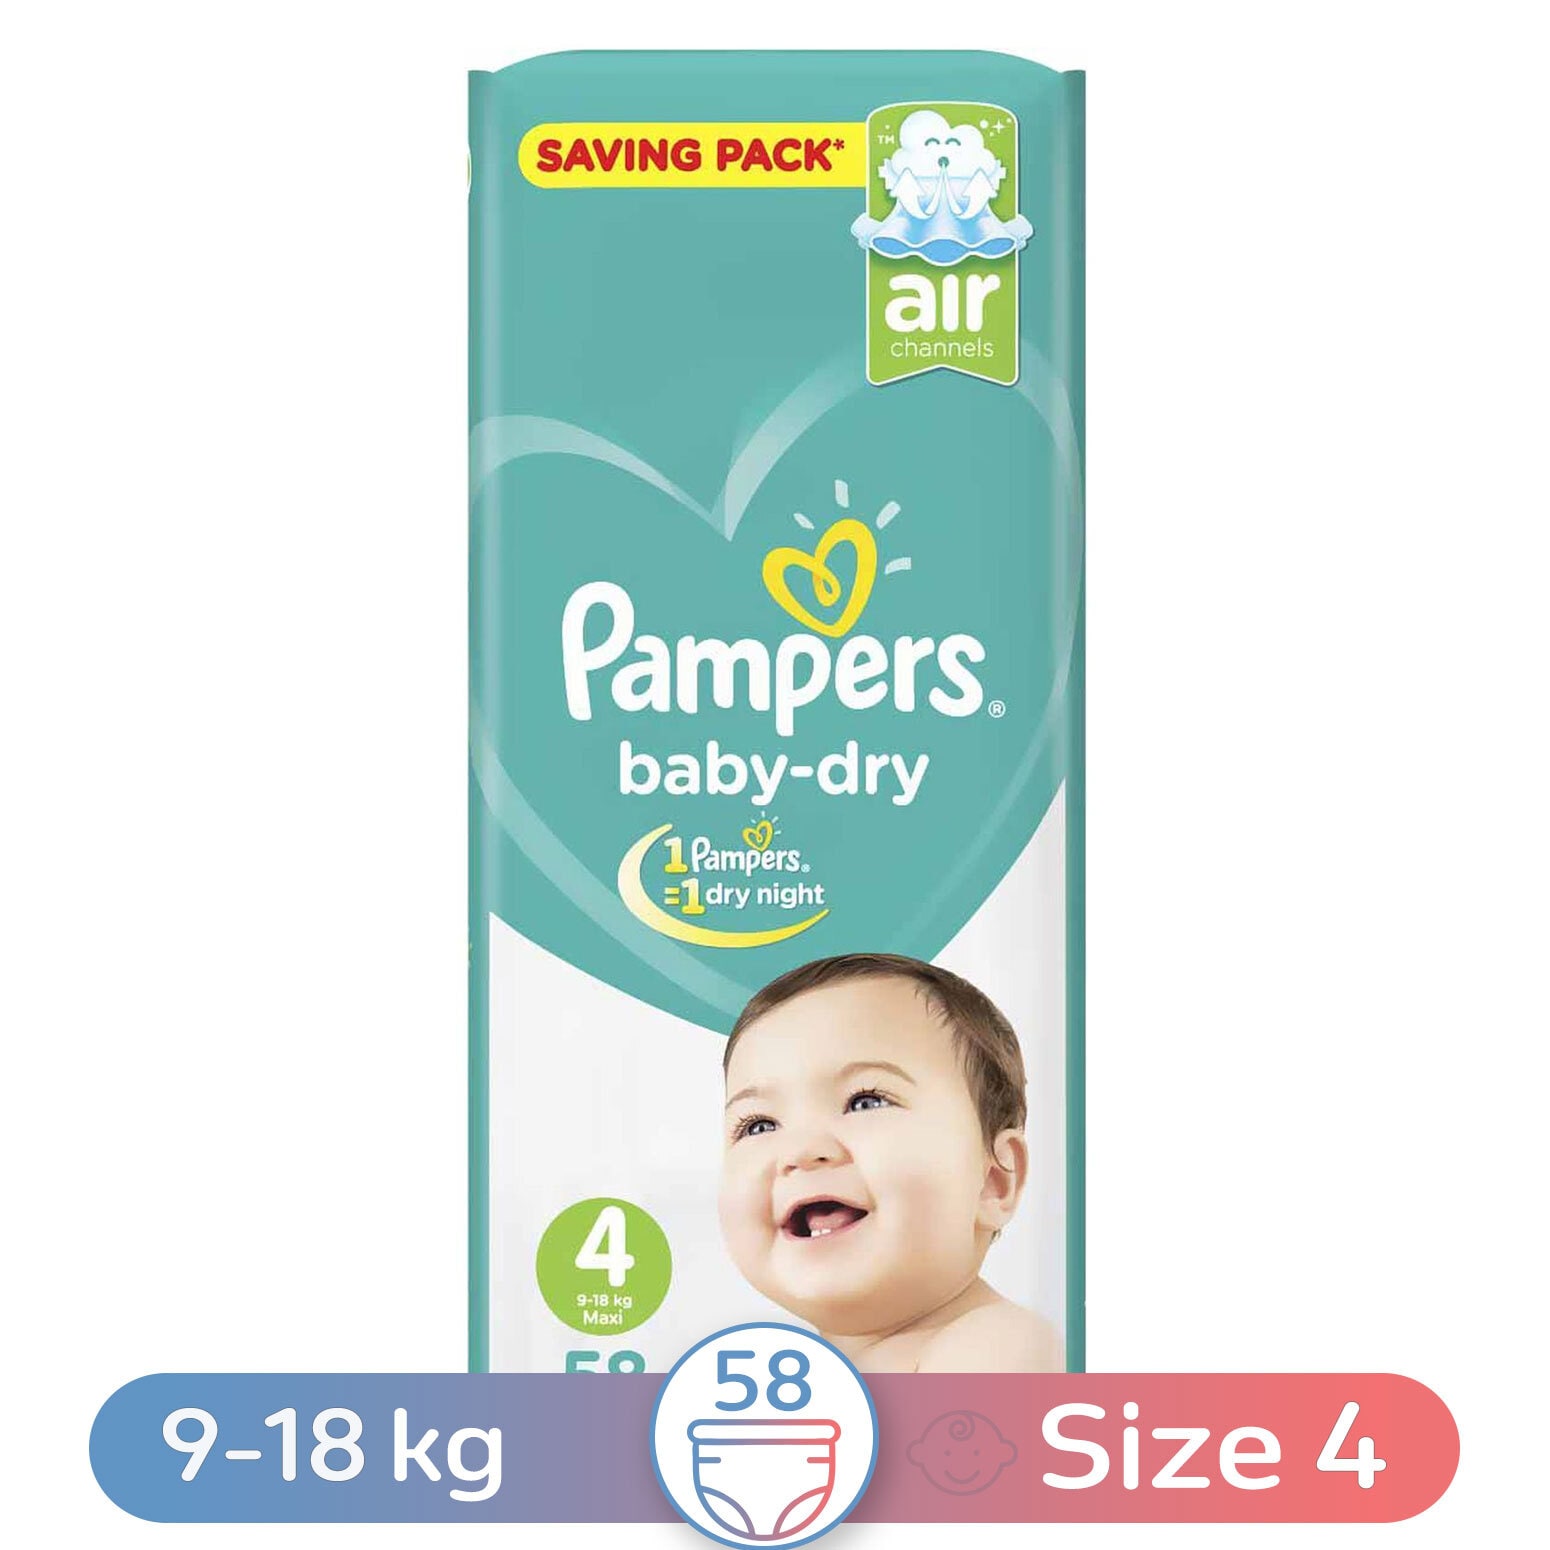 Buy Baby-Dry Diapers 4 Maxi, Kg - 58 Online - Shop Baby Products on Carrefour Egypt